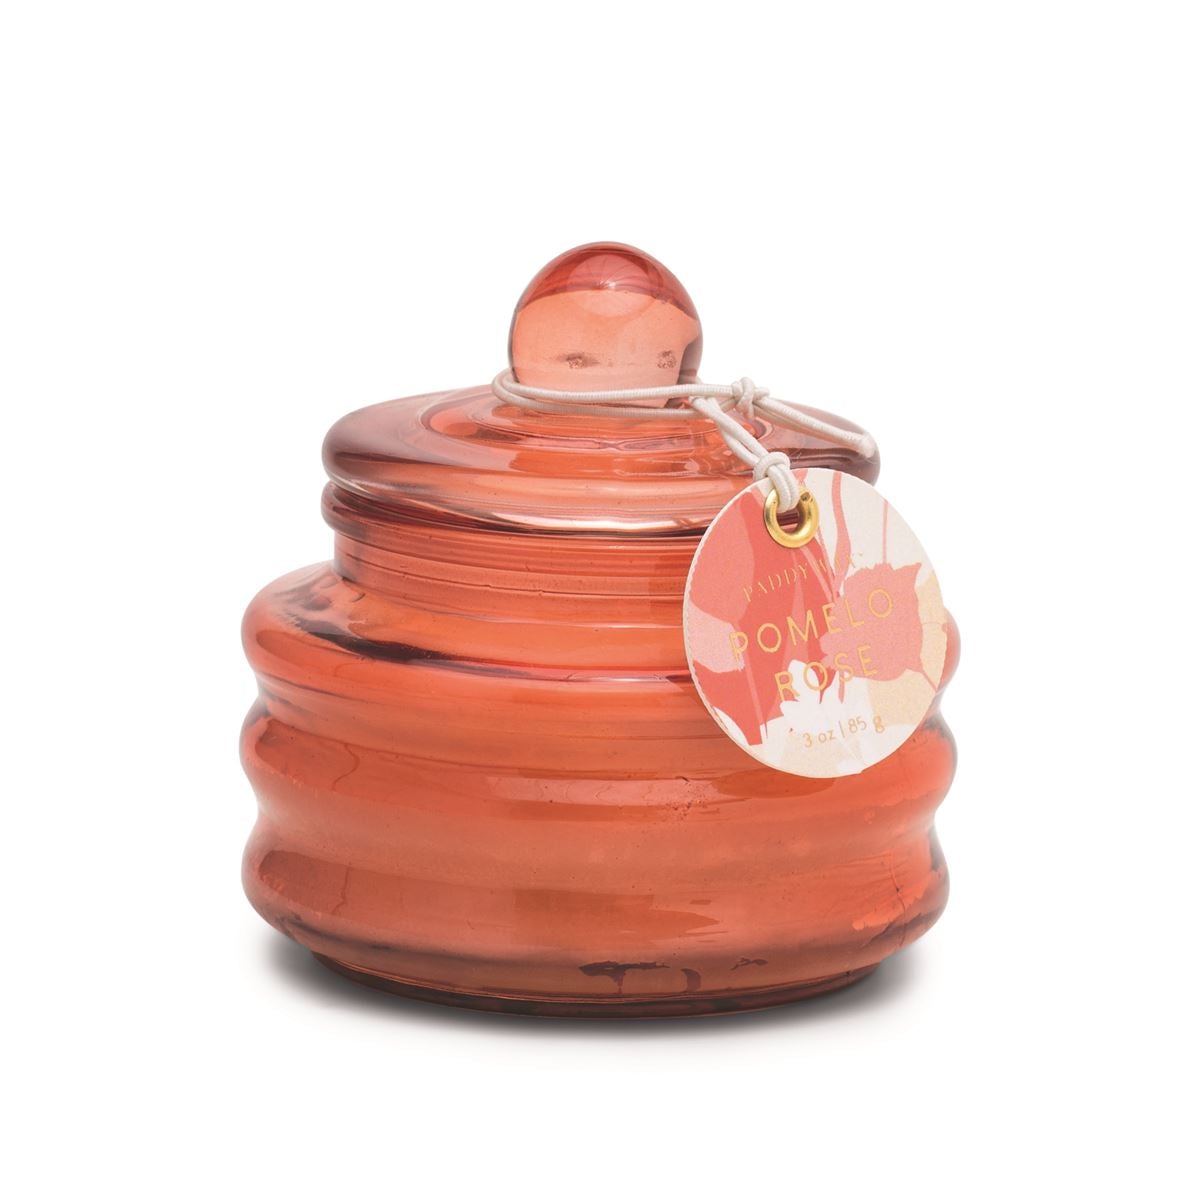 BEAM 3 OZ. RED SMALL GLASS VESSEL AND LID POMELO ROSE